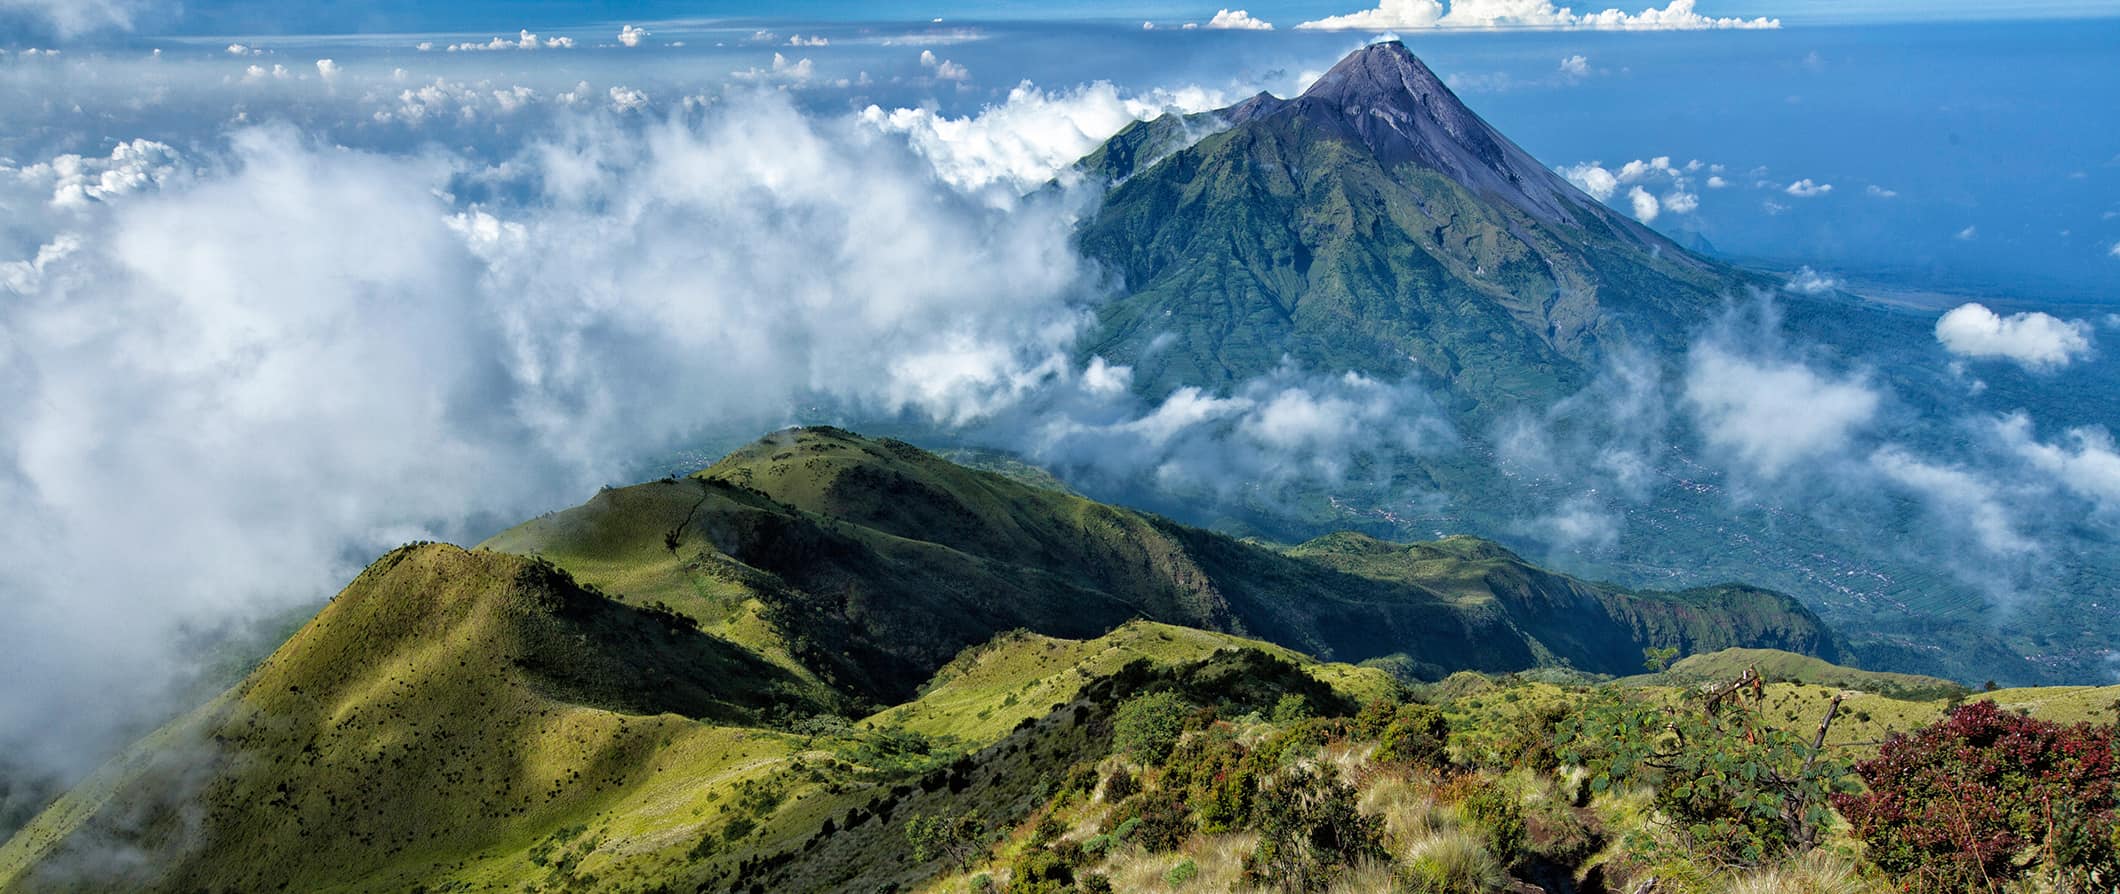 The verdant mountains and volcanoes in the lush landscapes of Indonesia